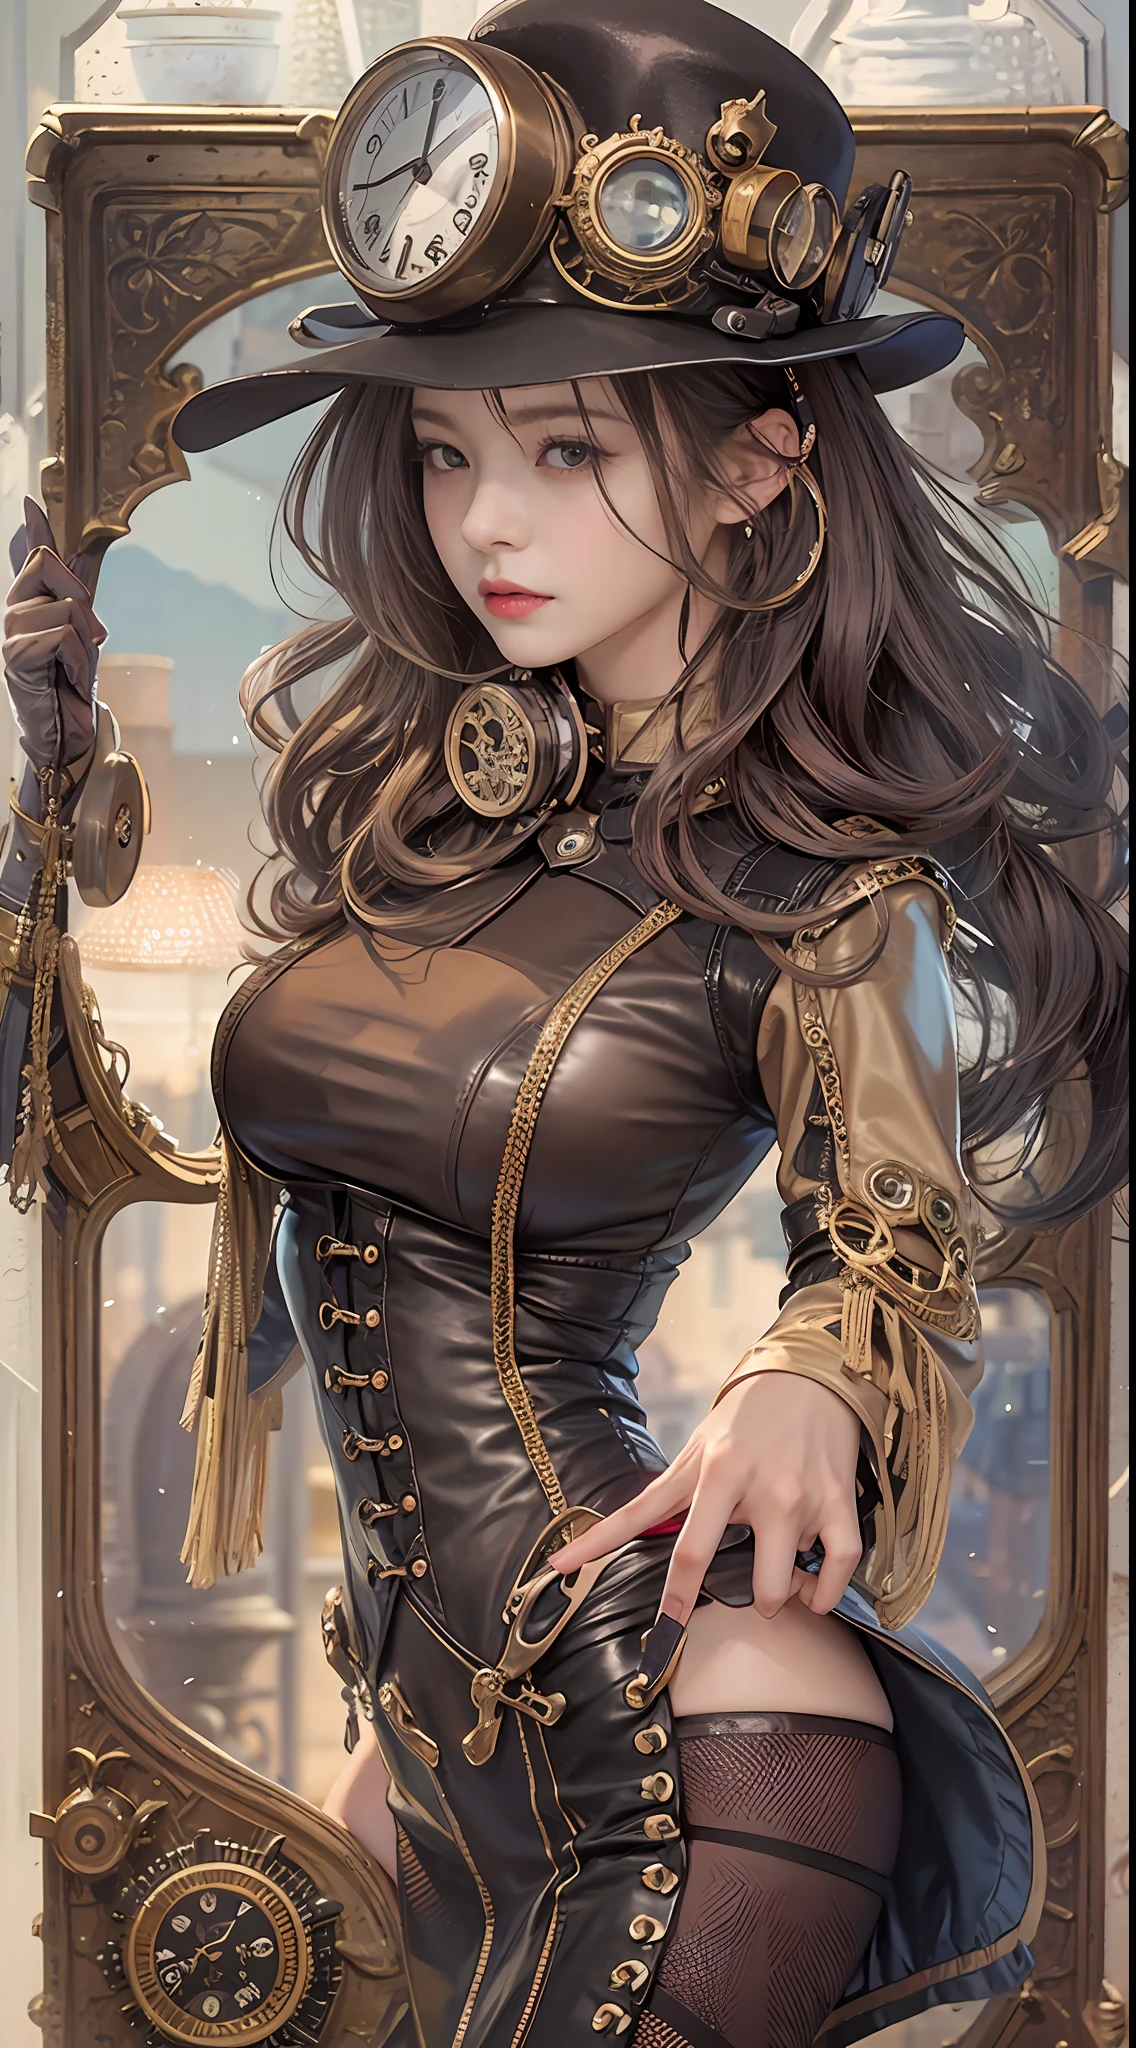 Alafe in leather costume posing for photo、Garter Belt、Steampunk Pin-Up Girl、Steampunk girls、steampunk beautiful anime woman、(highly detailed figure)、Beautiful Goddess of Steampunk、steampunk cyberpunk、Wearing steampunk costumes、Wearing a detailed steampunk dress、Close-up portrait shot、steampunk inventor girl、